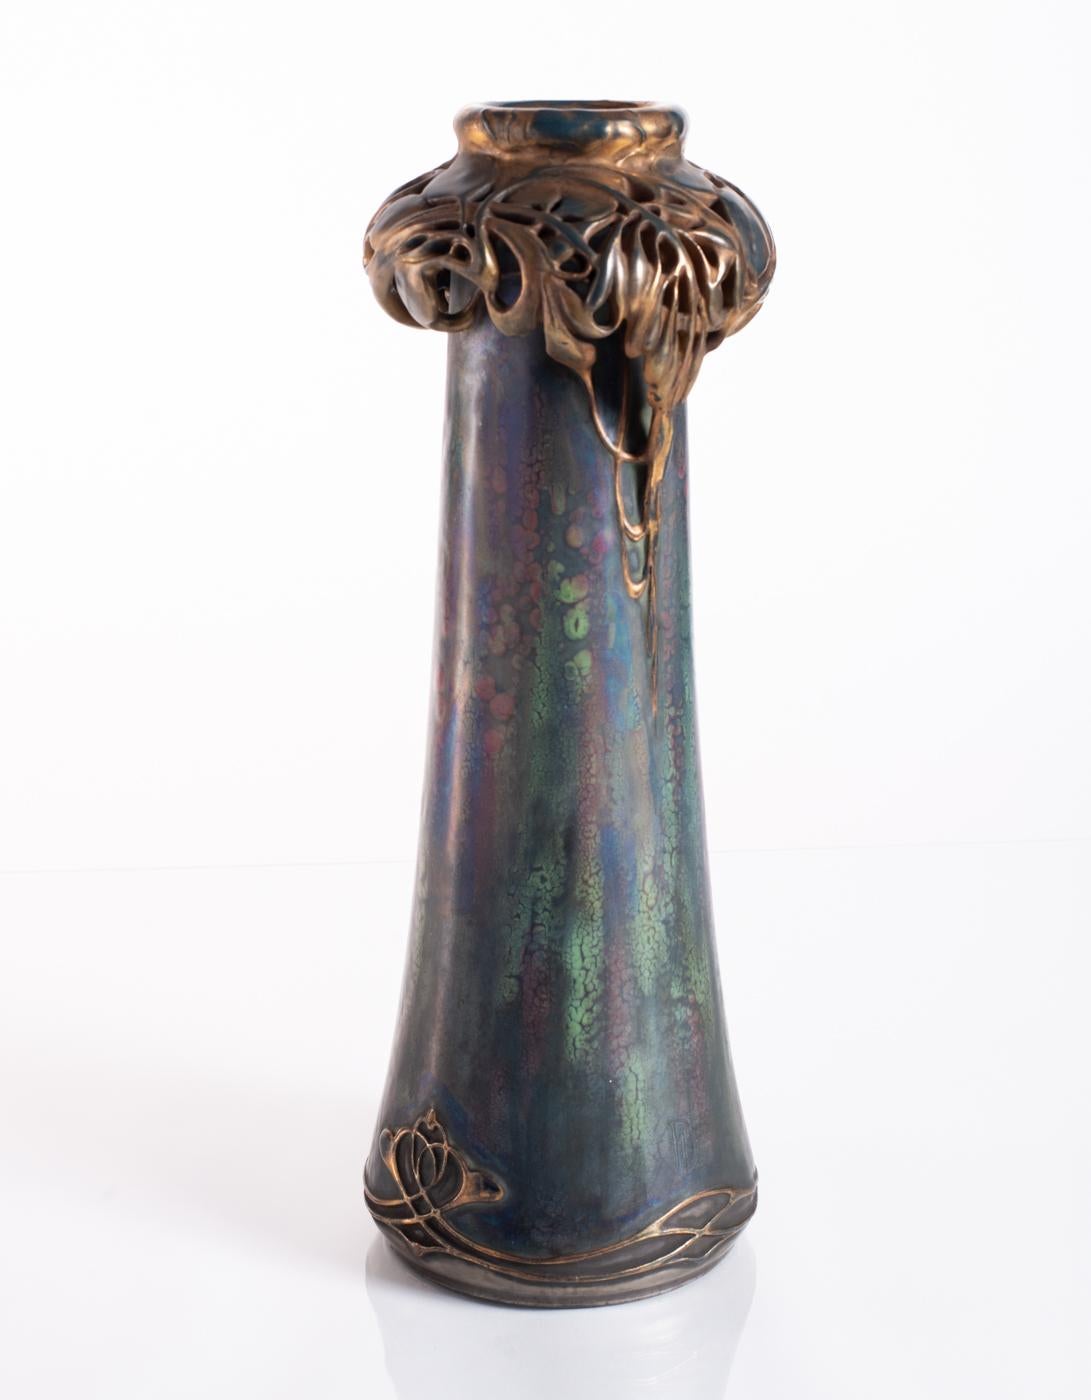 Floral Wreath Vase by Paul Dachsel for Amphora c. 1900